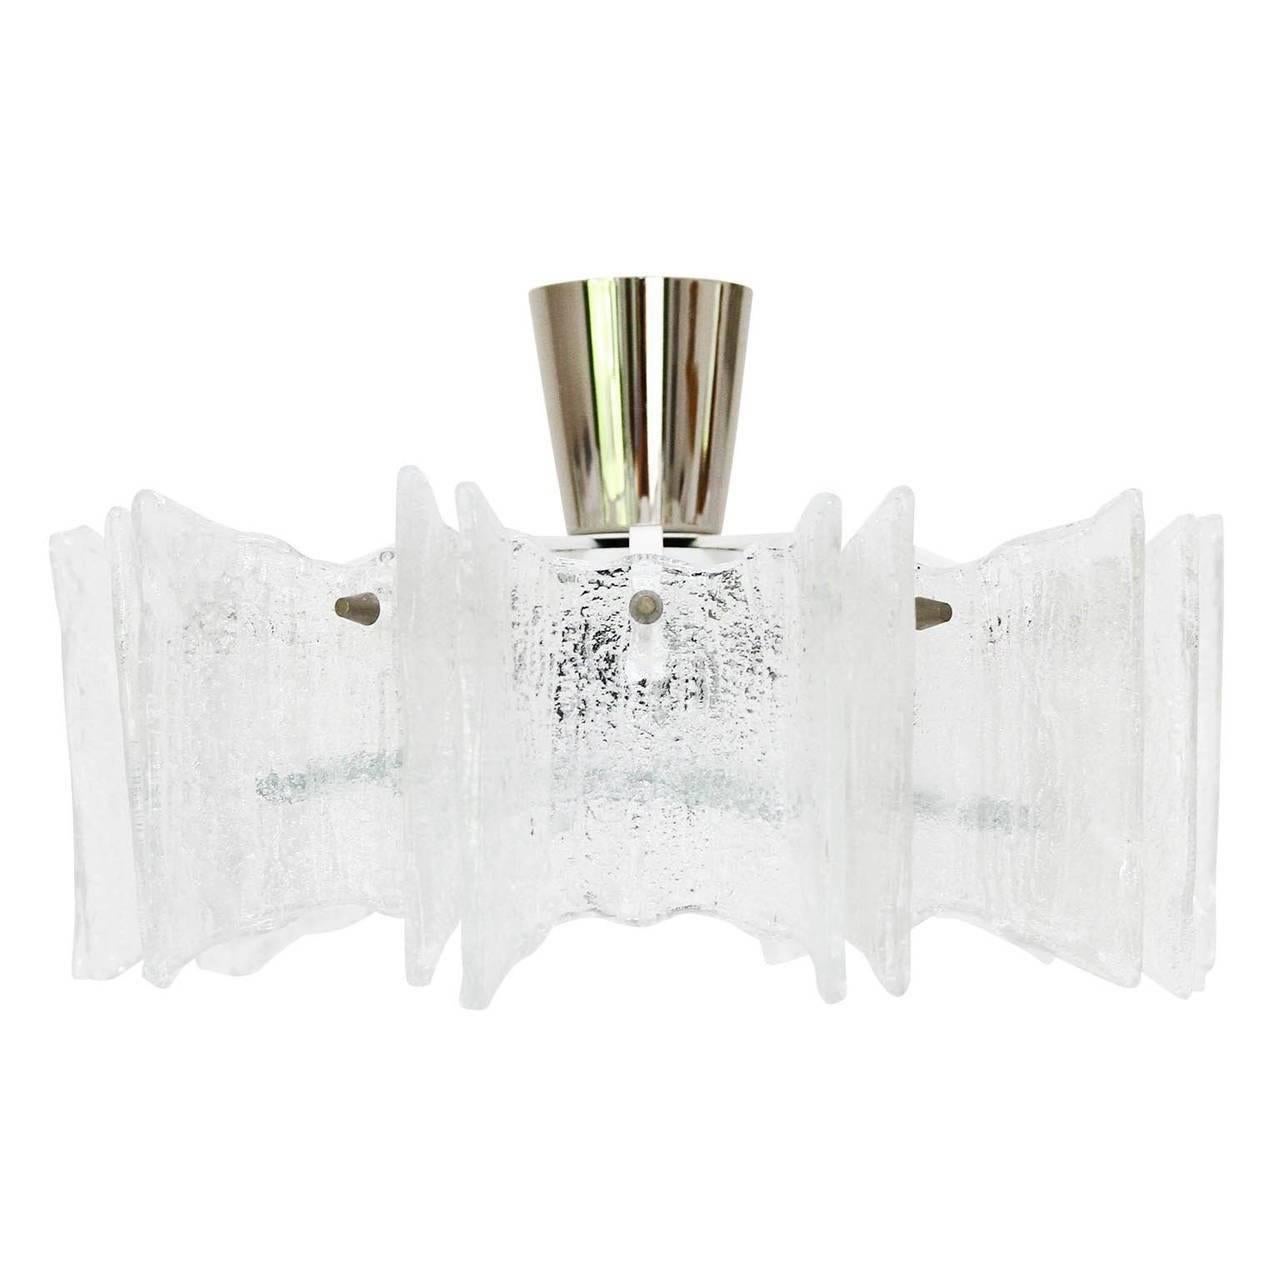 A beautiful star-shaped light fixture by Kalmar Vienna, Austria, manufactured in Mid-Century in 1960s.
It is made of frosted glass and a white lacquered and nickel-plated (chrome) frame. The light can be used as flush mount light or as chandelier.